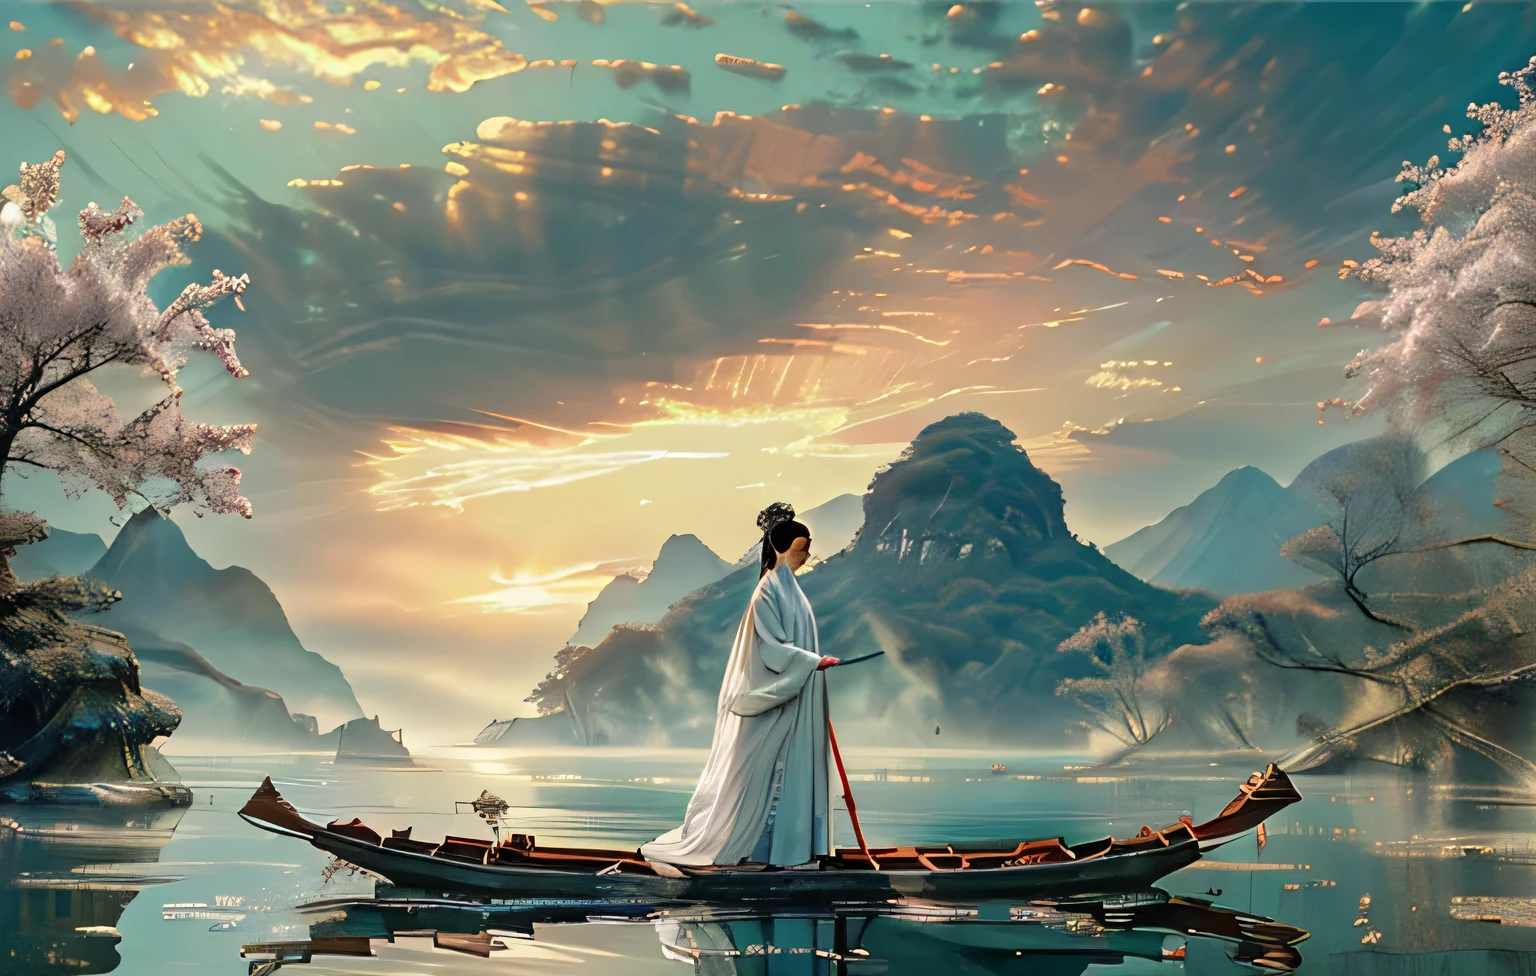 ((masterpiece))), (((best quality))), ((super detailed)), (highly detailed computer illustration), ((extremely delicate and beautiful))Create a serene and ethereal scene set in a mystical landscape at sunset. A young woman in traditional flowing robes is gracefully rowing a small boat on a calm, reflective river. She is surrounded by dramatic cliffs and delicate cherry blossom trees in full bloom. The sky is a canvas of pastel hues, with soft clouds illuminated by the setting sun. Capture the tranquility and beauty of this moment, with a focus on the harmonious blend of nature and the serene figure.